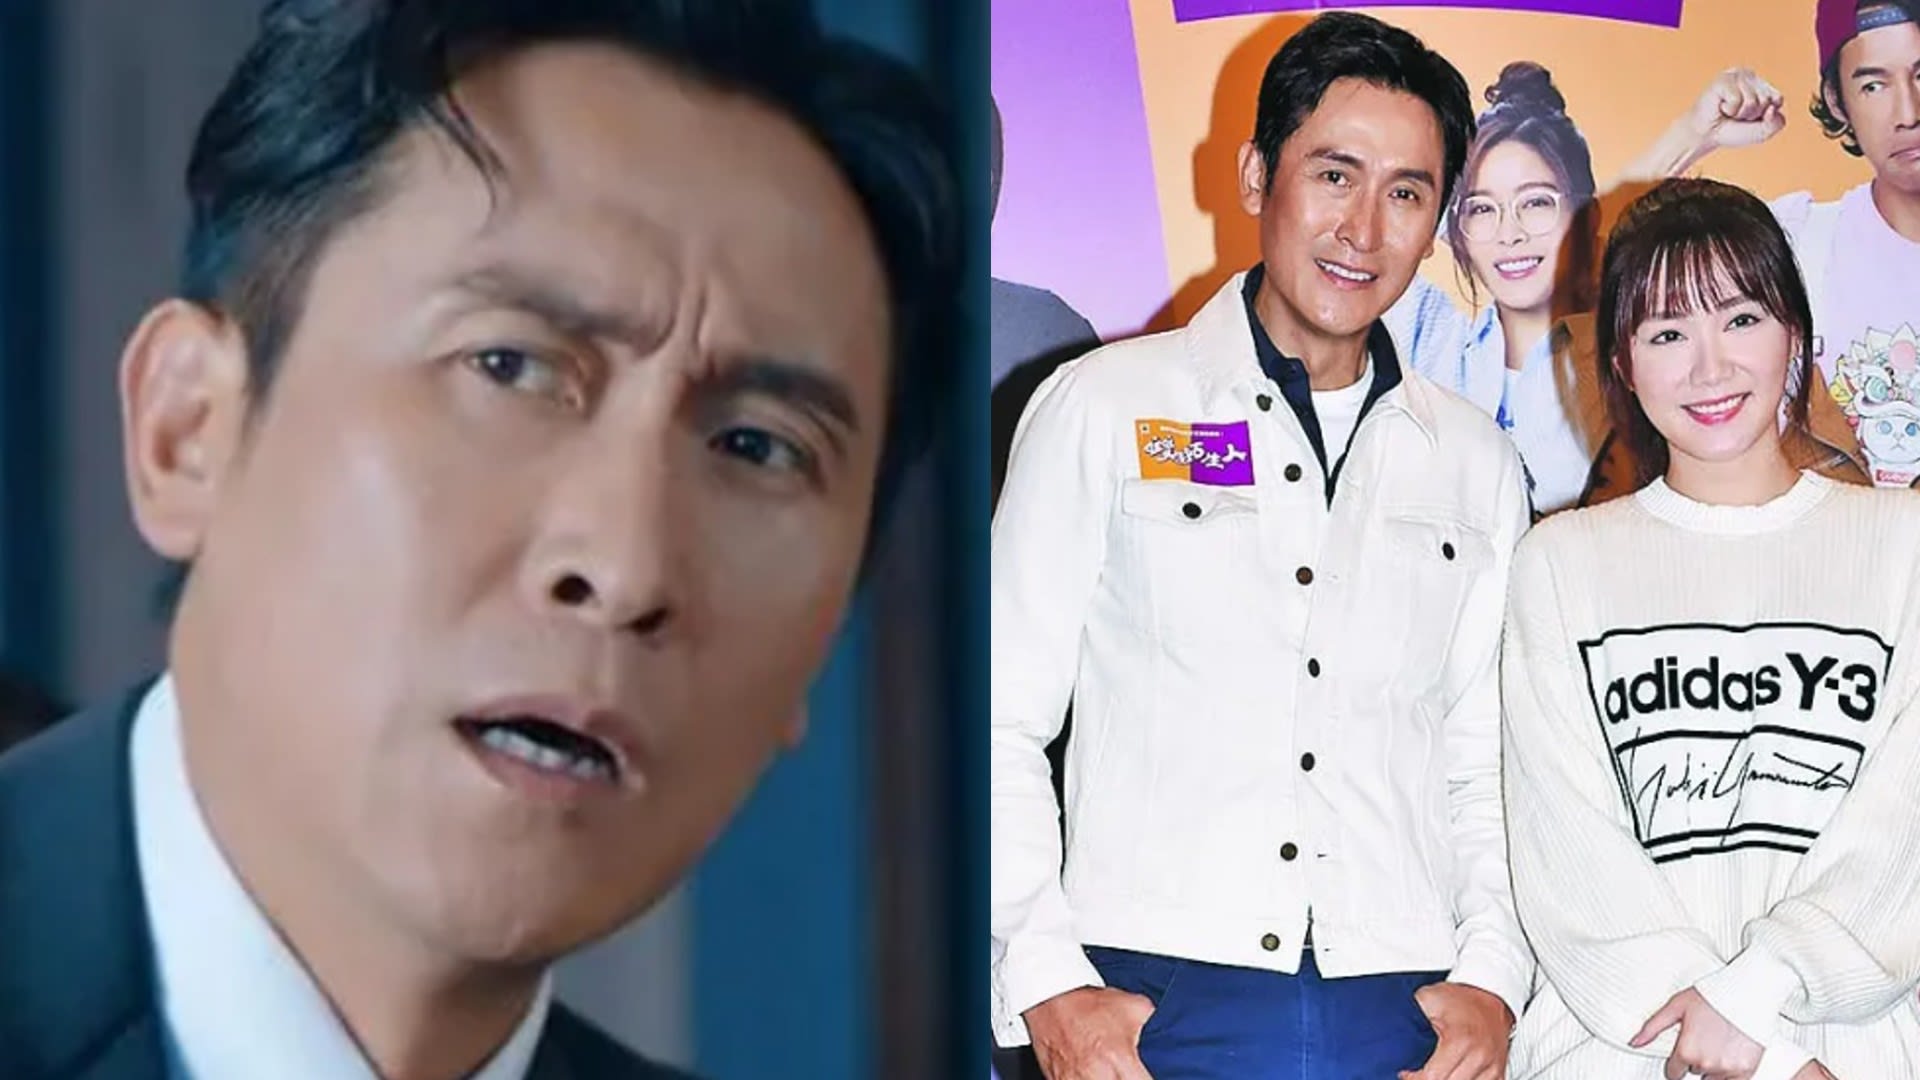 53-Year-Old Joe Ma’s New Drama Debuts With TVB’s Lowest Ratings Of The Year, Netizens Say His Age Is A “Turn-Off” For Viewers